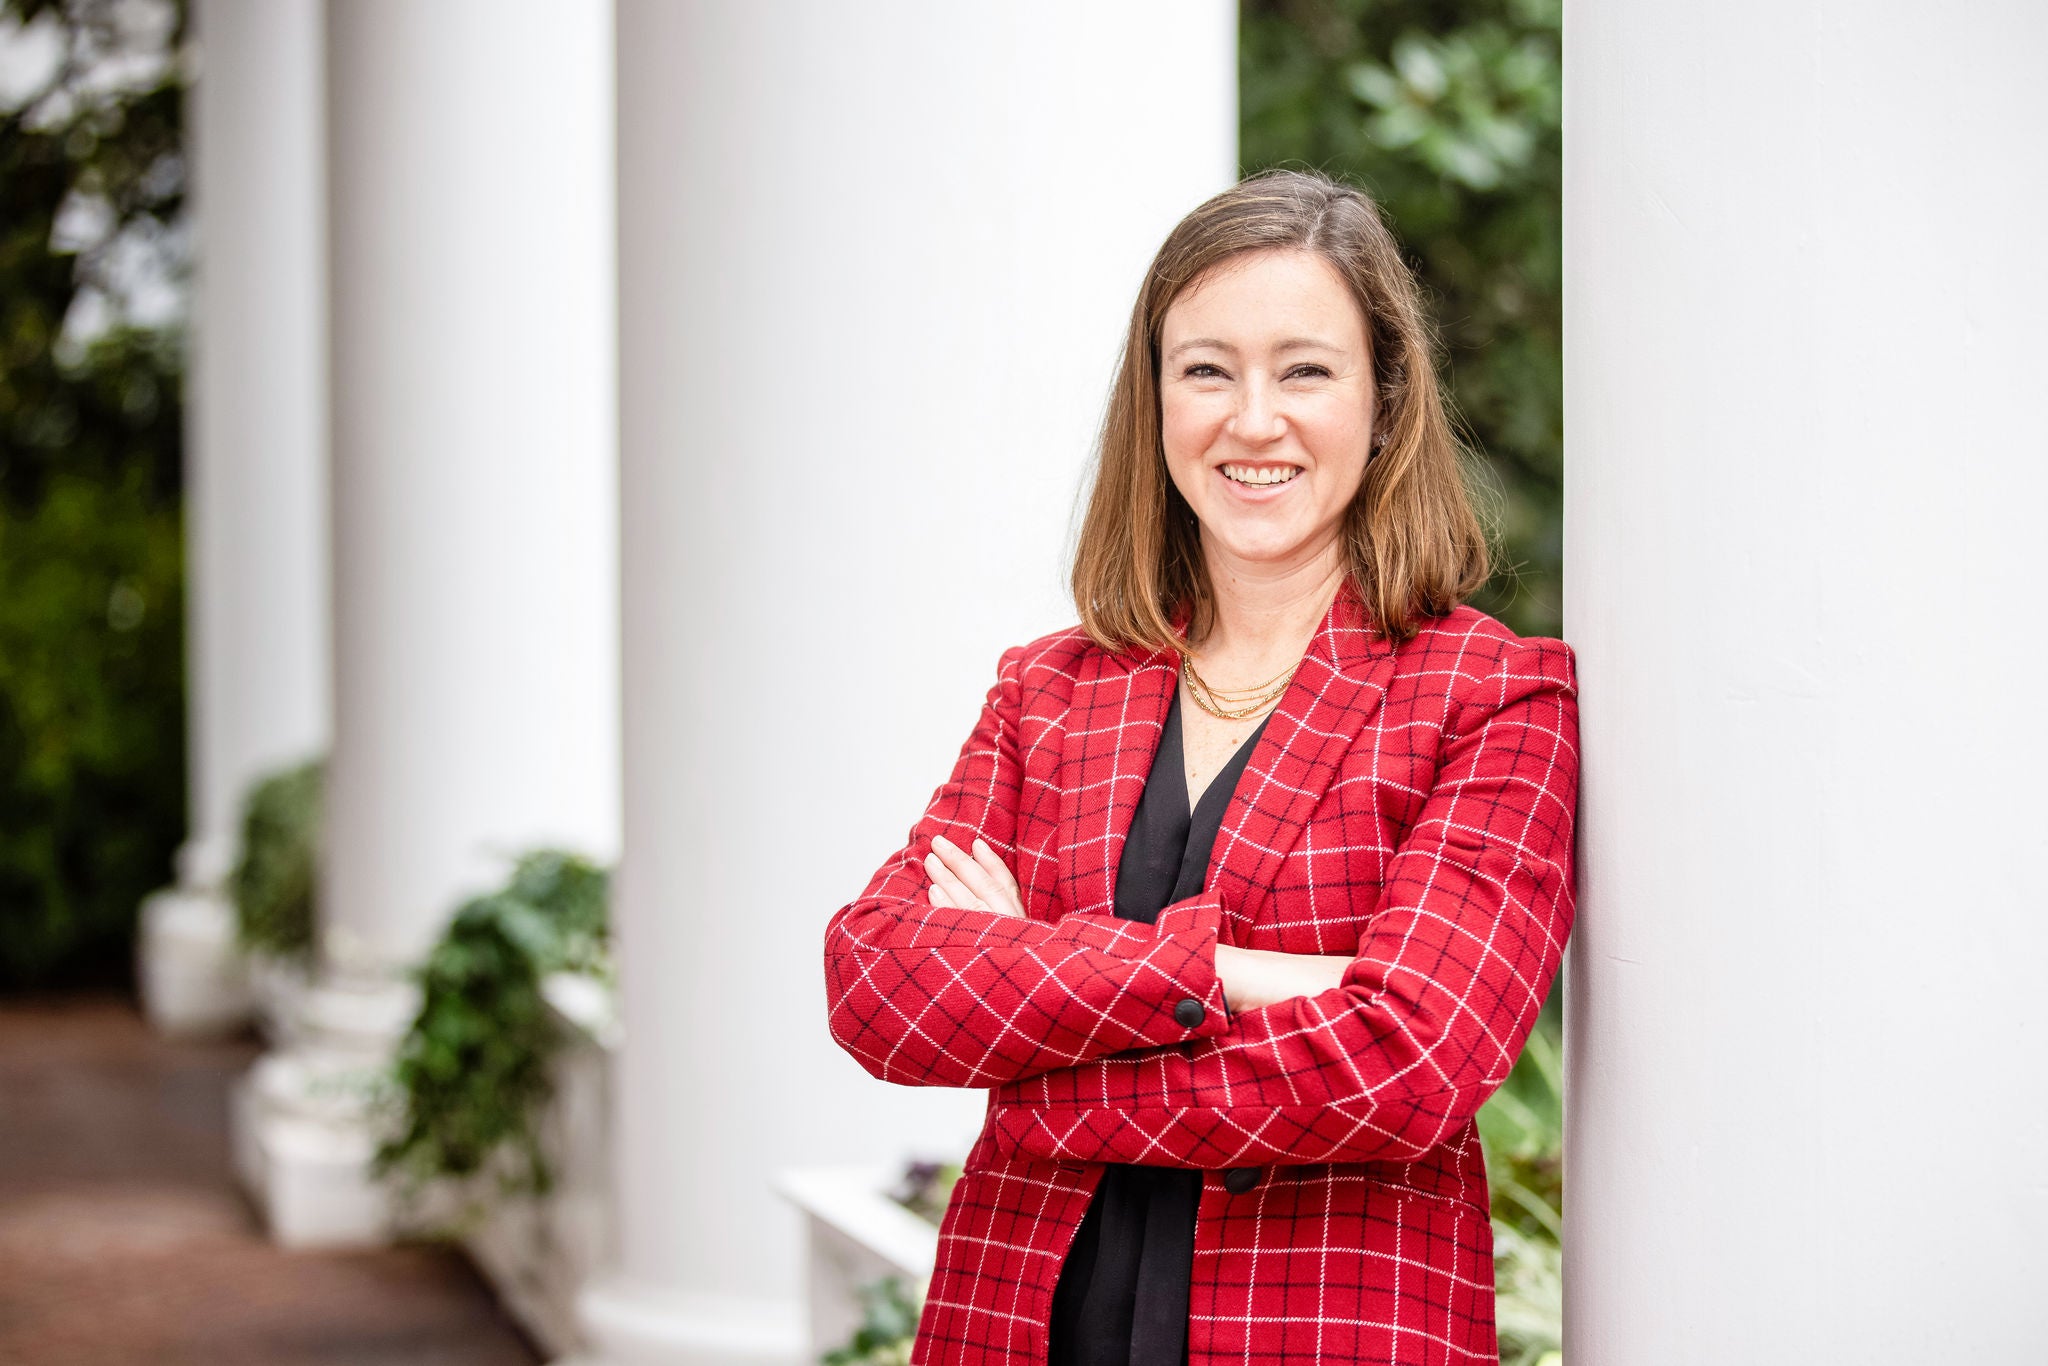 Headshot of Charlotte general manager, Kelly Adkisson, wearing a red plaid blazer and leaning against a white column, smiling.